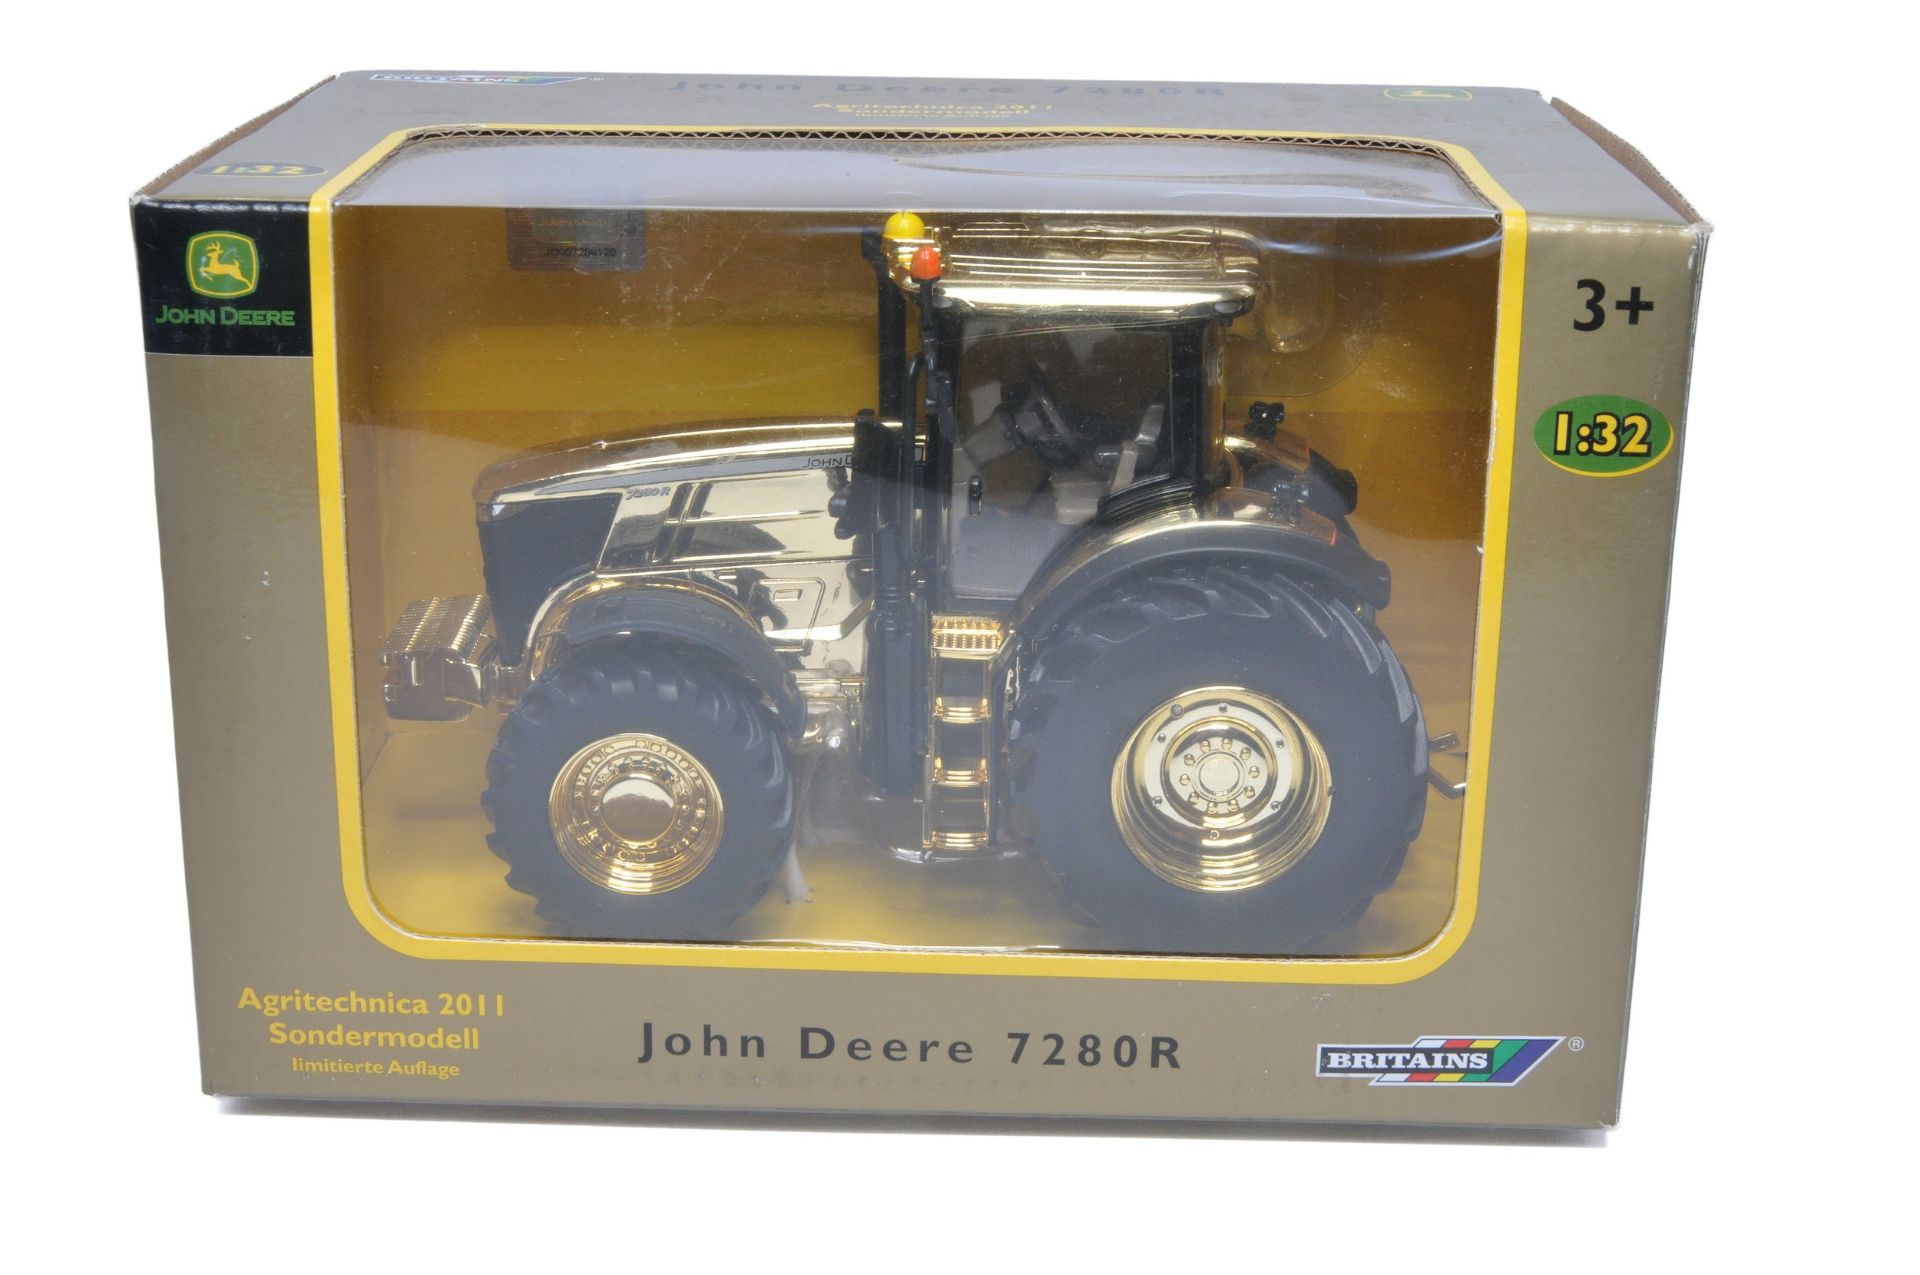 Britains Farm No. 42725 John Deere 7280R Tractor. Special Gold Edition for Agritechnica 2011.